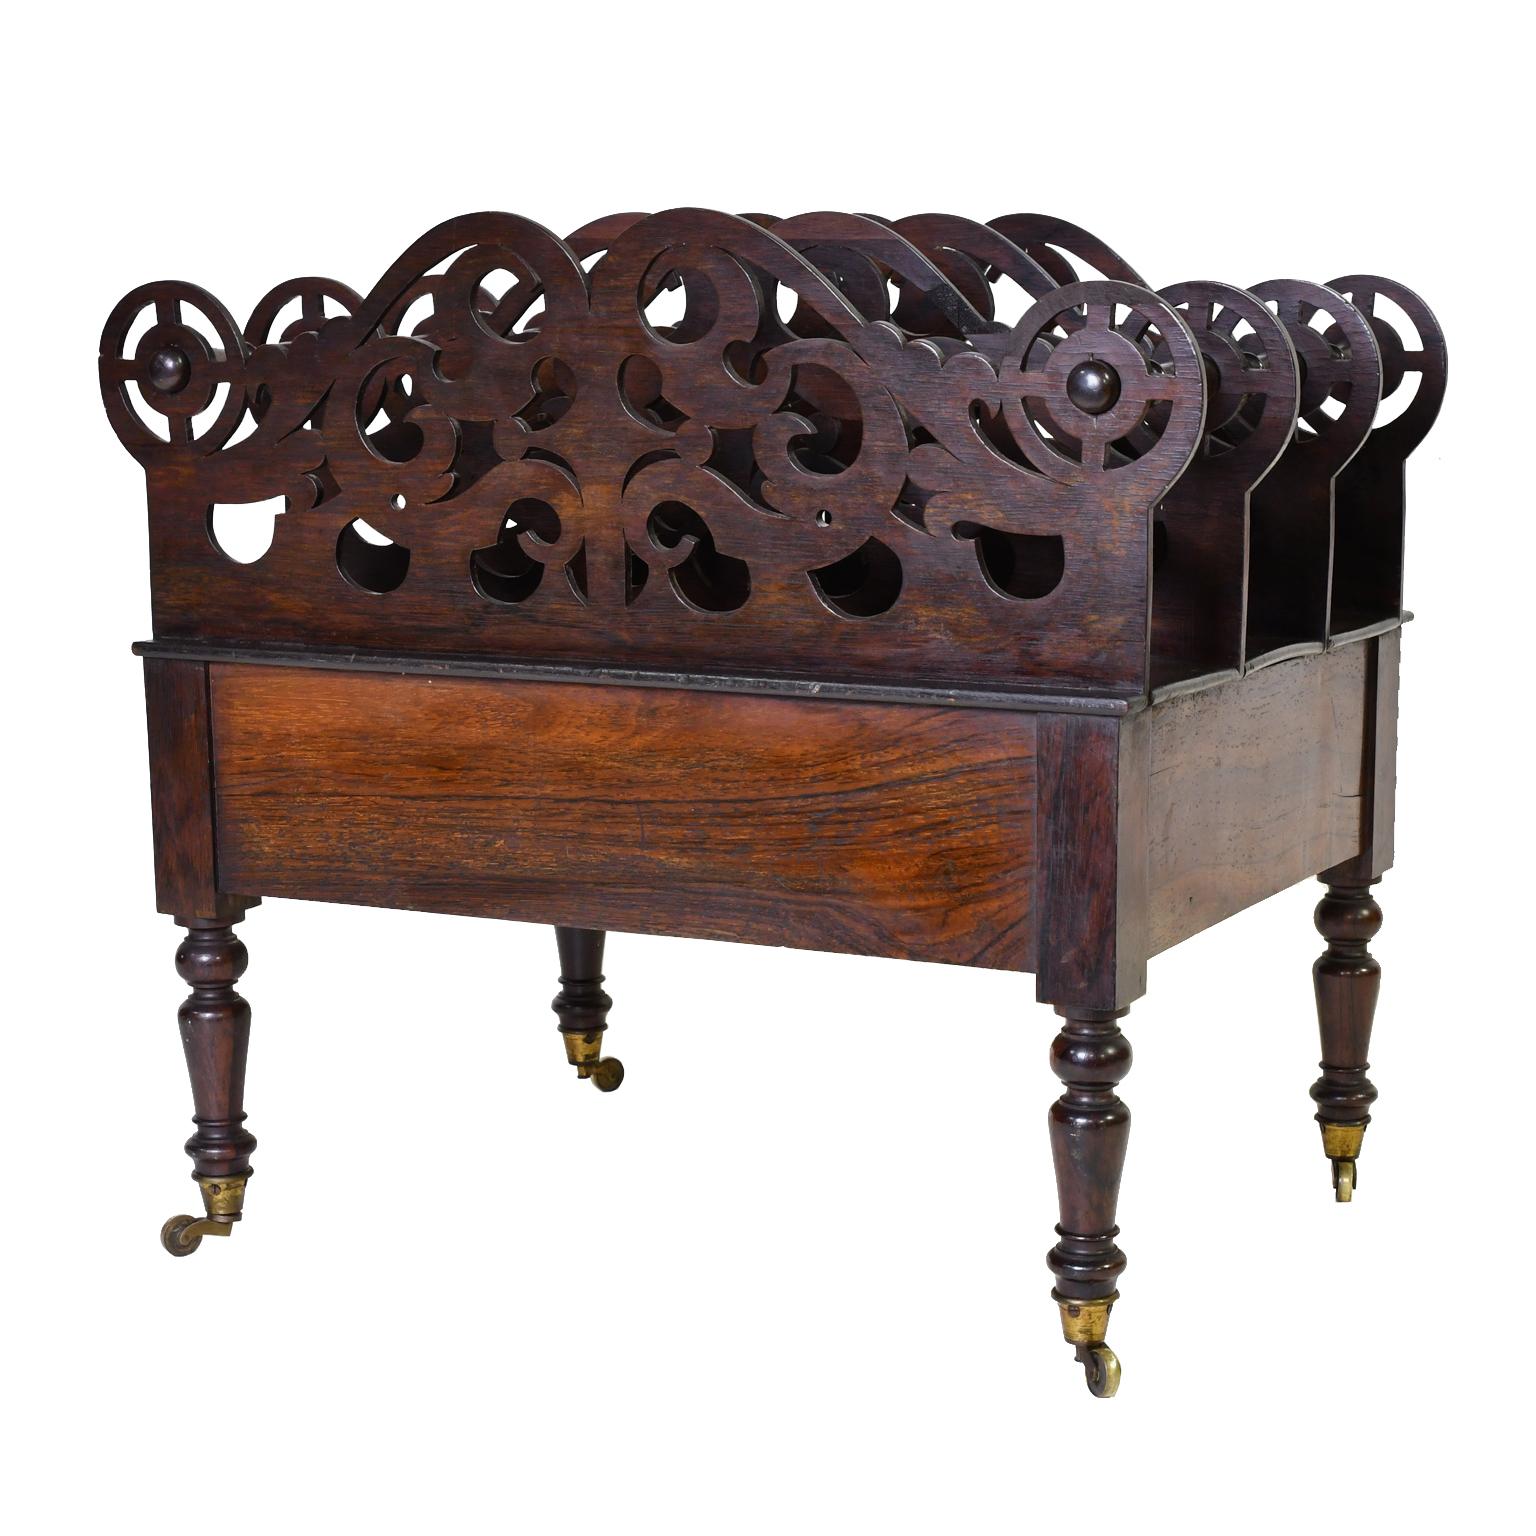 English William IV Canterbury or Sheet Music Rack in Rosewood with Fretwork, circa 1830